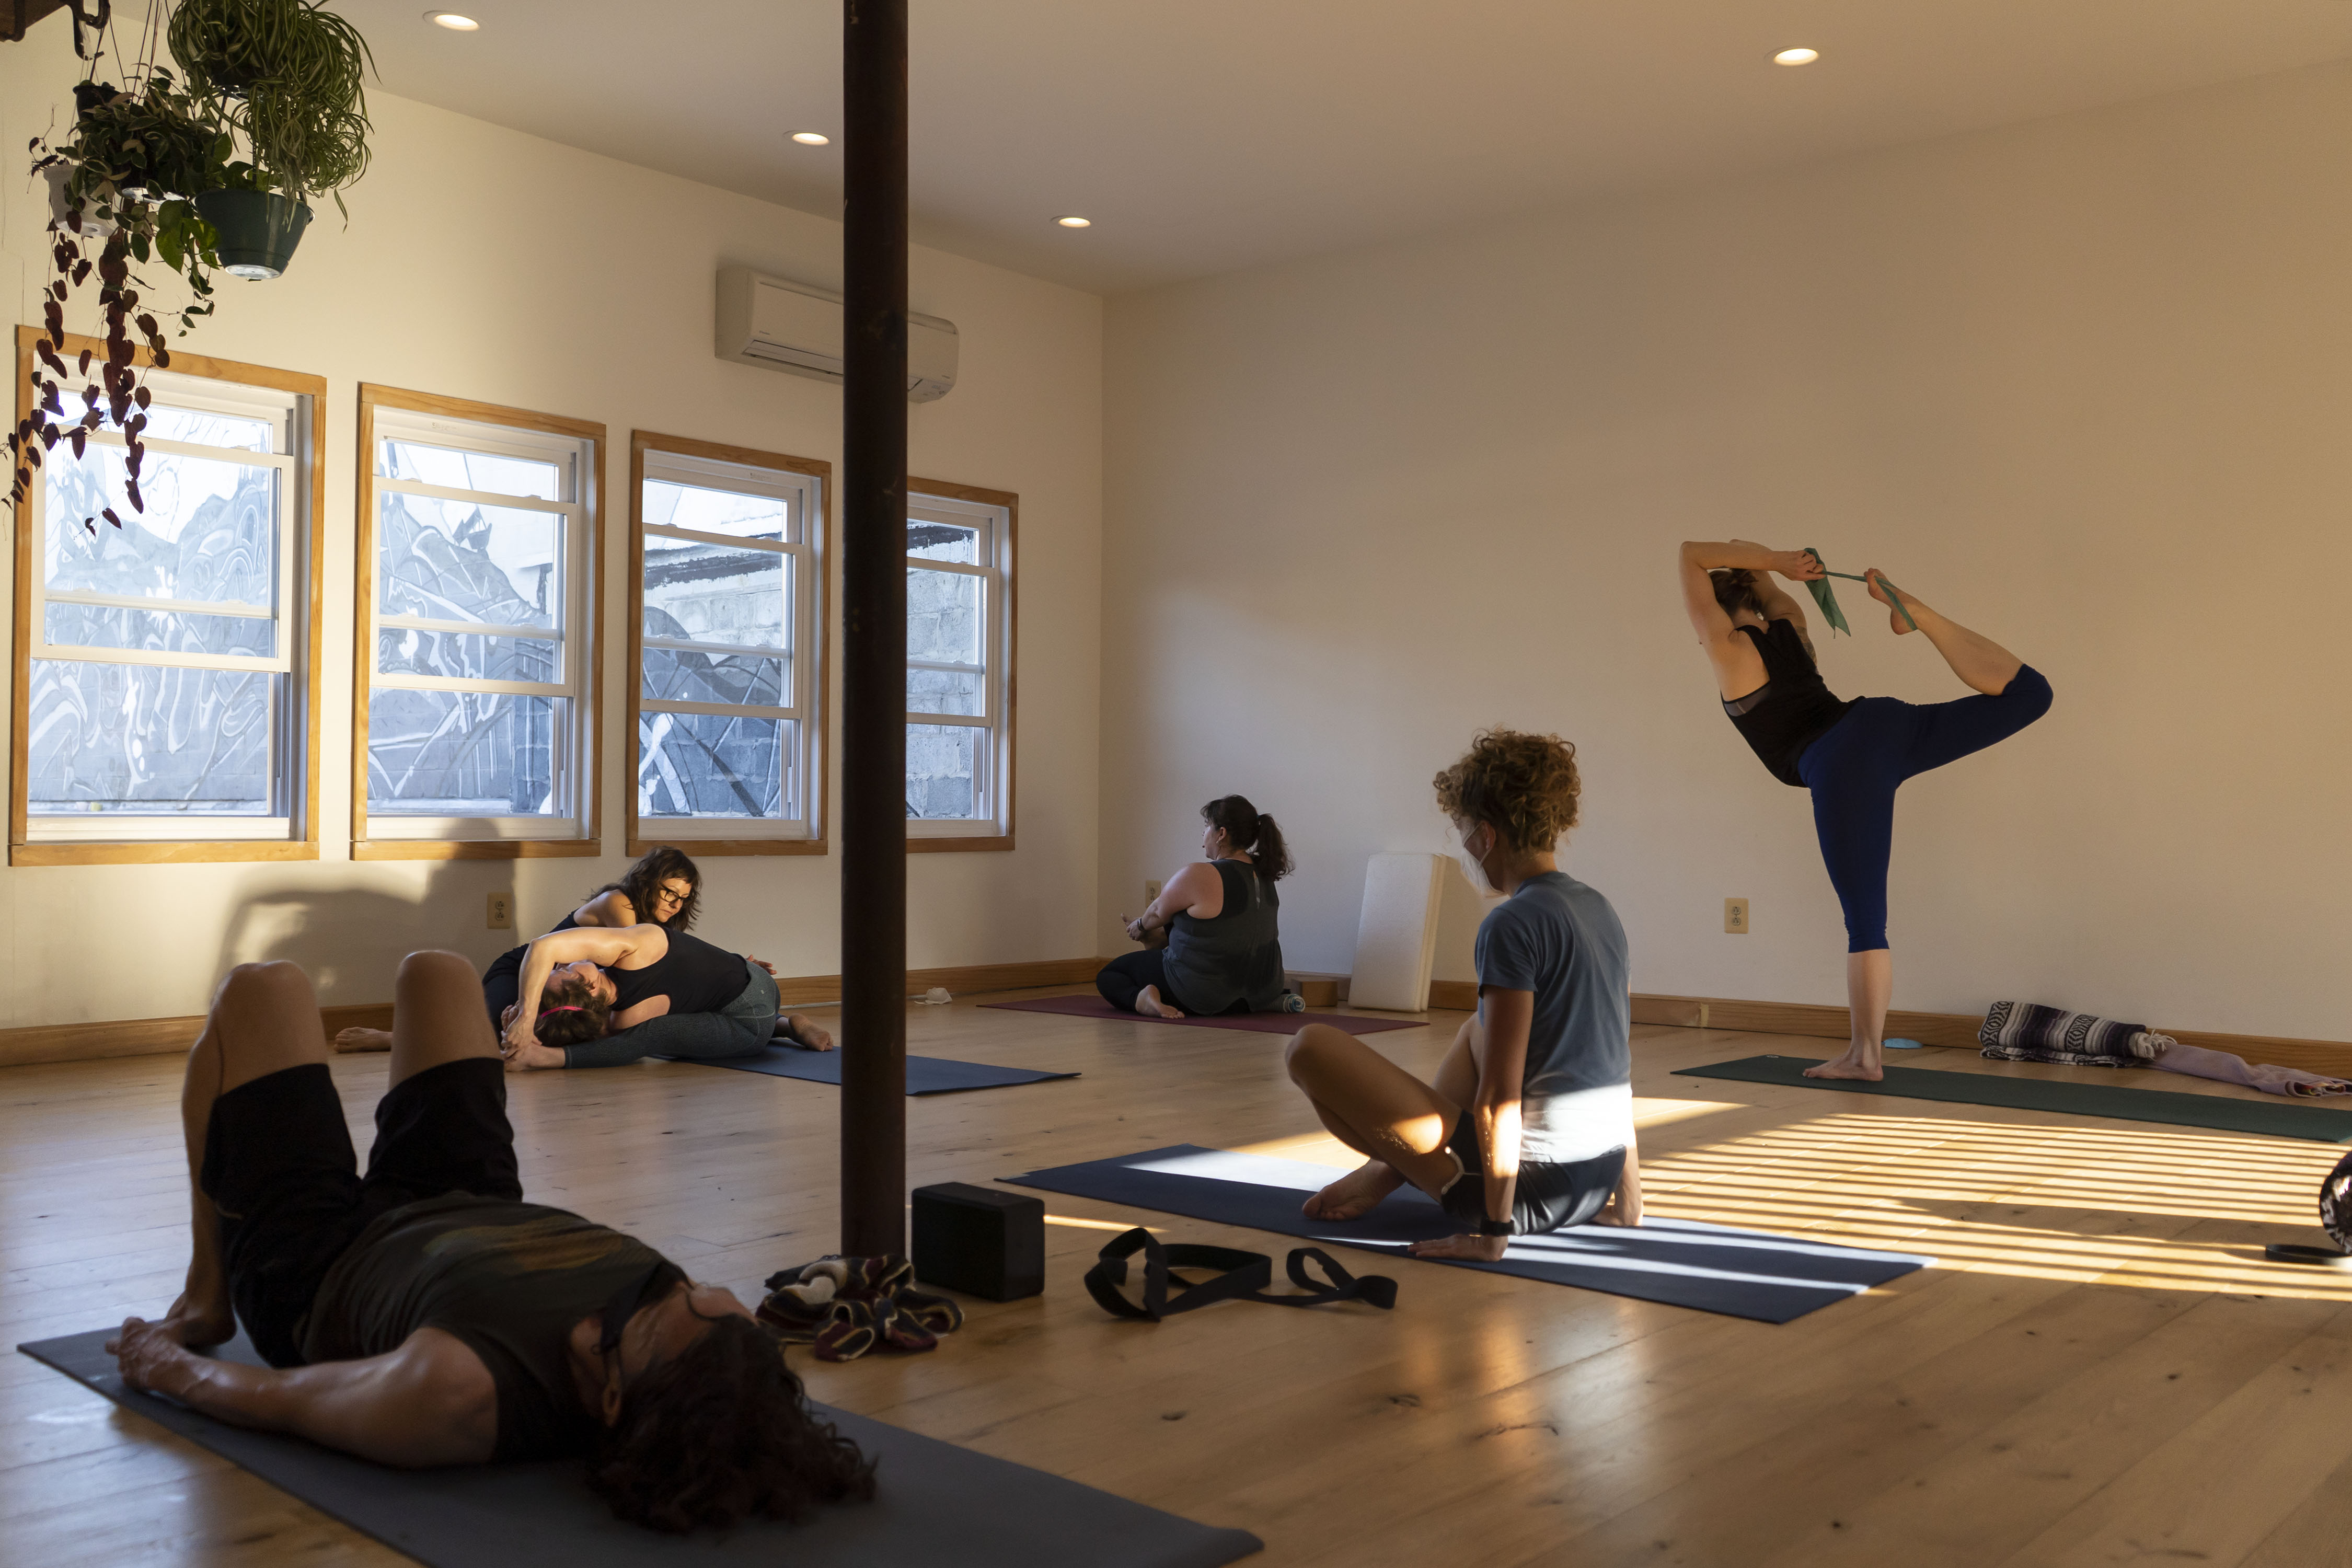 Baltimore yoga studios that caught a newcomer's eye: Consider this